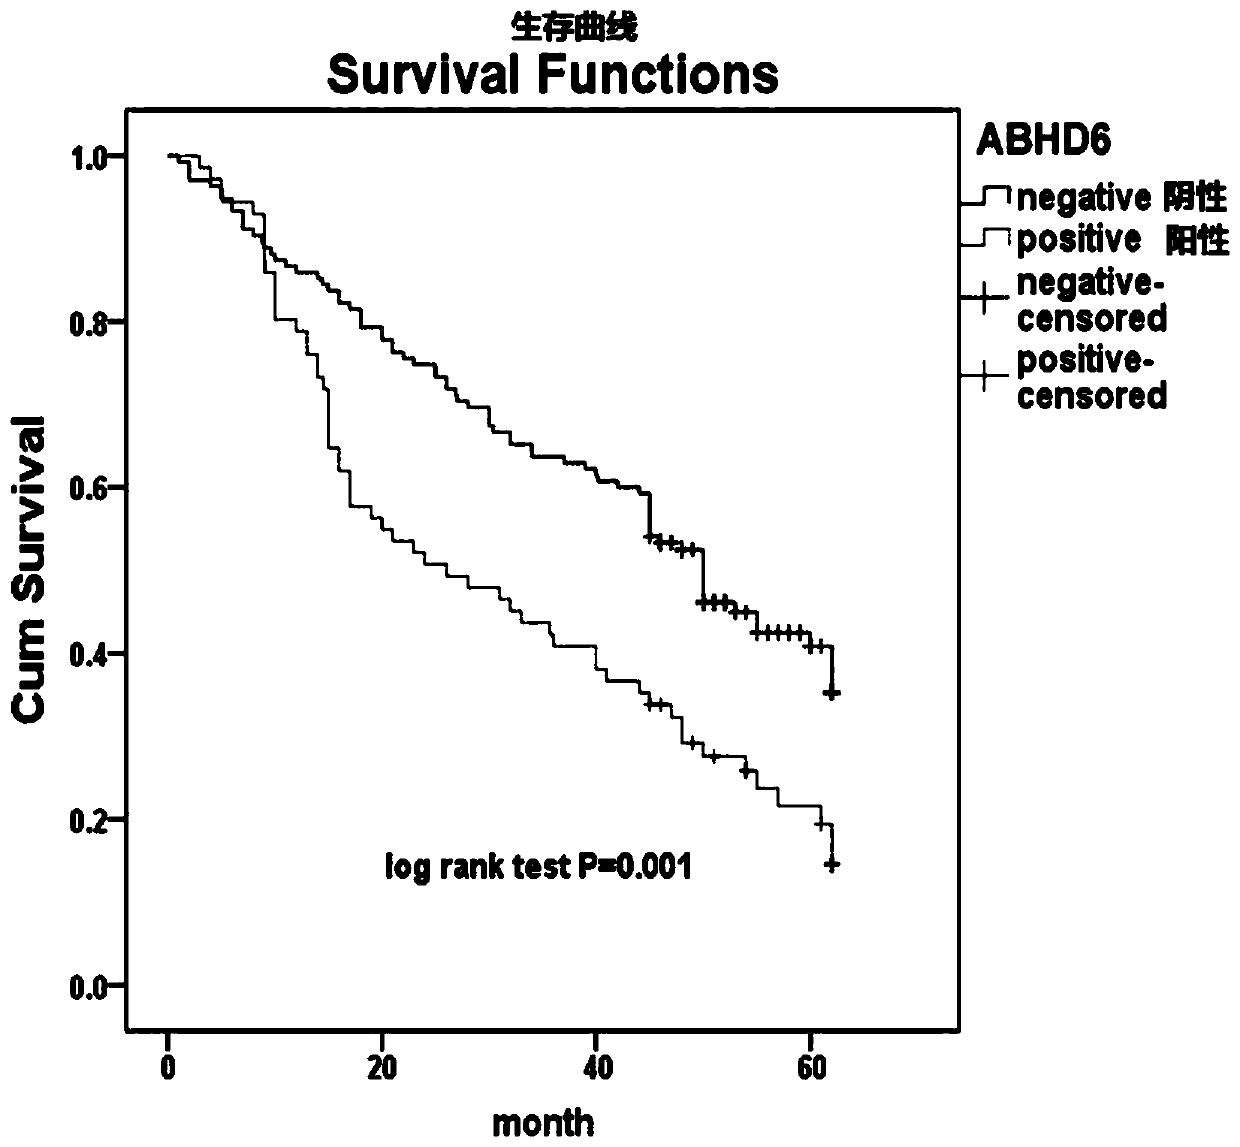 Application of ABHD6 in diagnosis, prognosis and treatment products of non-small cell lung cancer